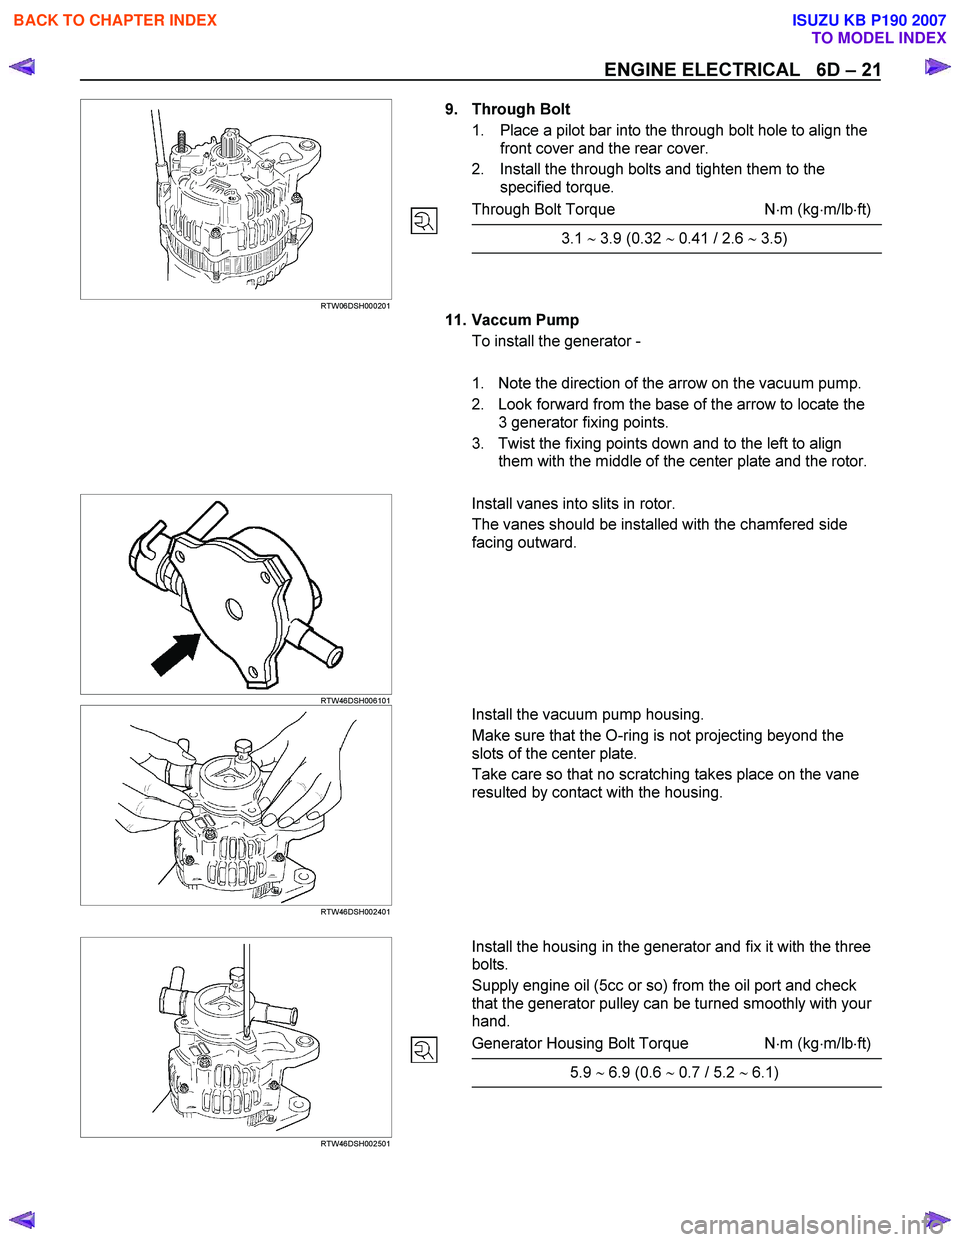 ISUZU KB P190 2007  Workshop Owners Guide ENGINE ELECTRICAL   6D – 21 
   
 
 
 
RTW06DSH000201    
 
 
 
 
 
 
 
 
 
 
 
9. Through Bolt 
1.  Place a pilot bar into the through bolt hole to align the  front cover and the rear cover. 
2.  I